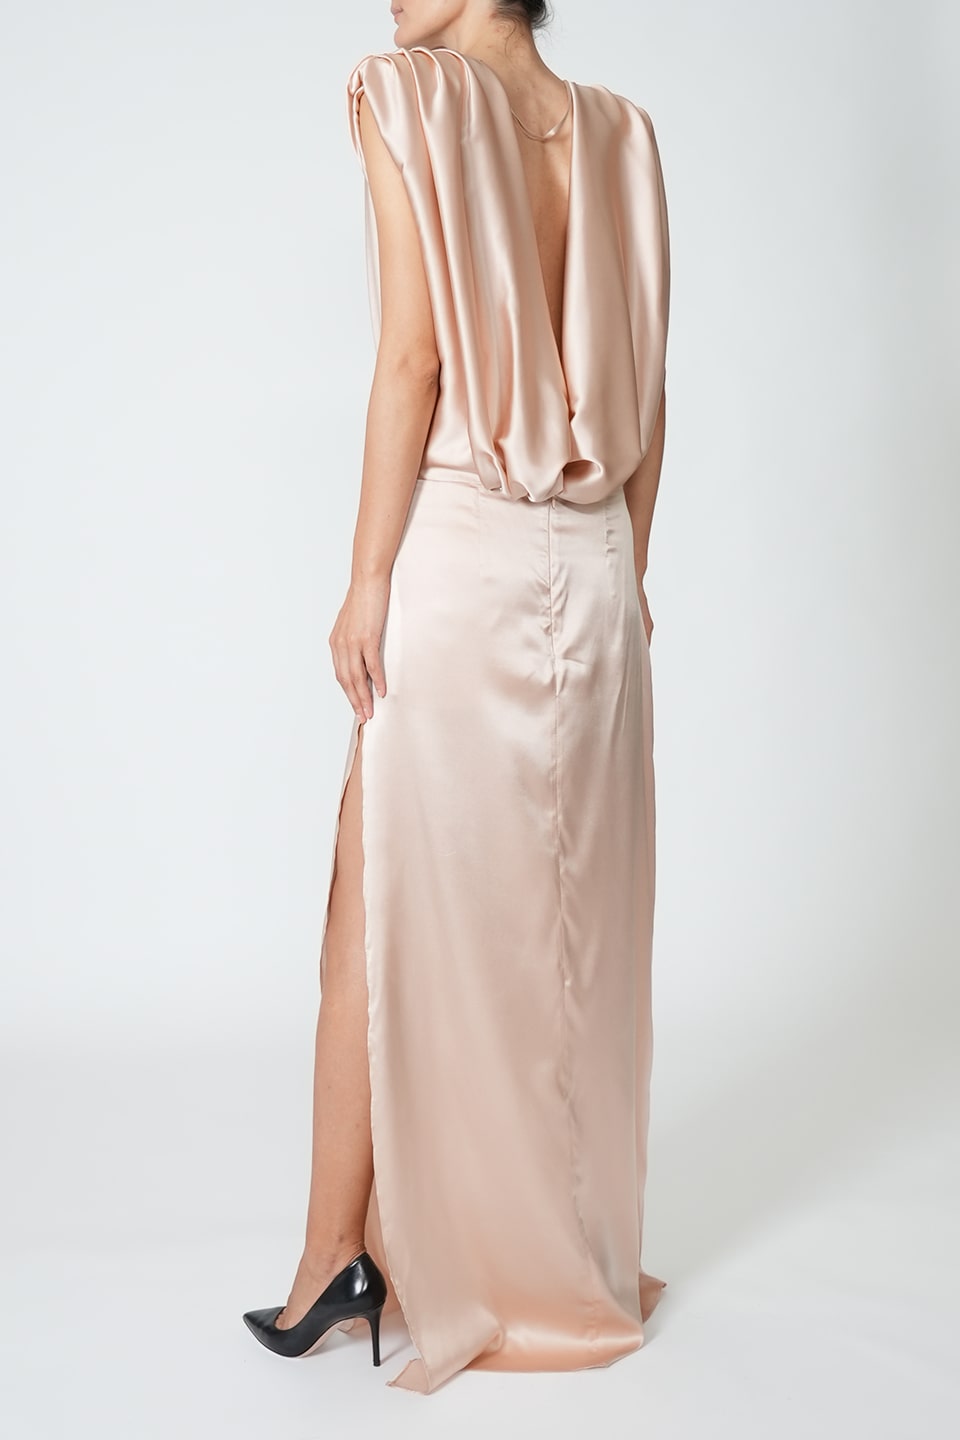 Thumbnail for Product gallery 6, Maxi dress blush, dresses for special occasions in Dubai. Free delivery in UAE